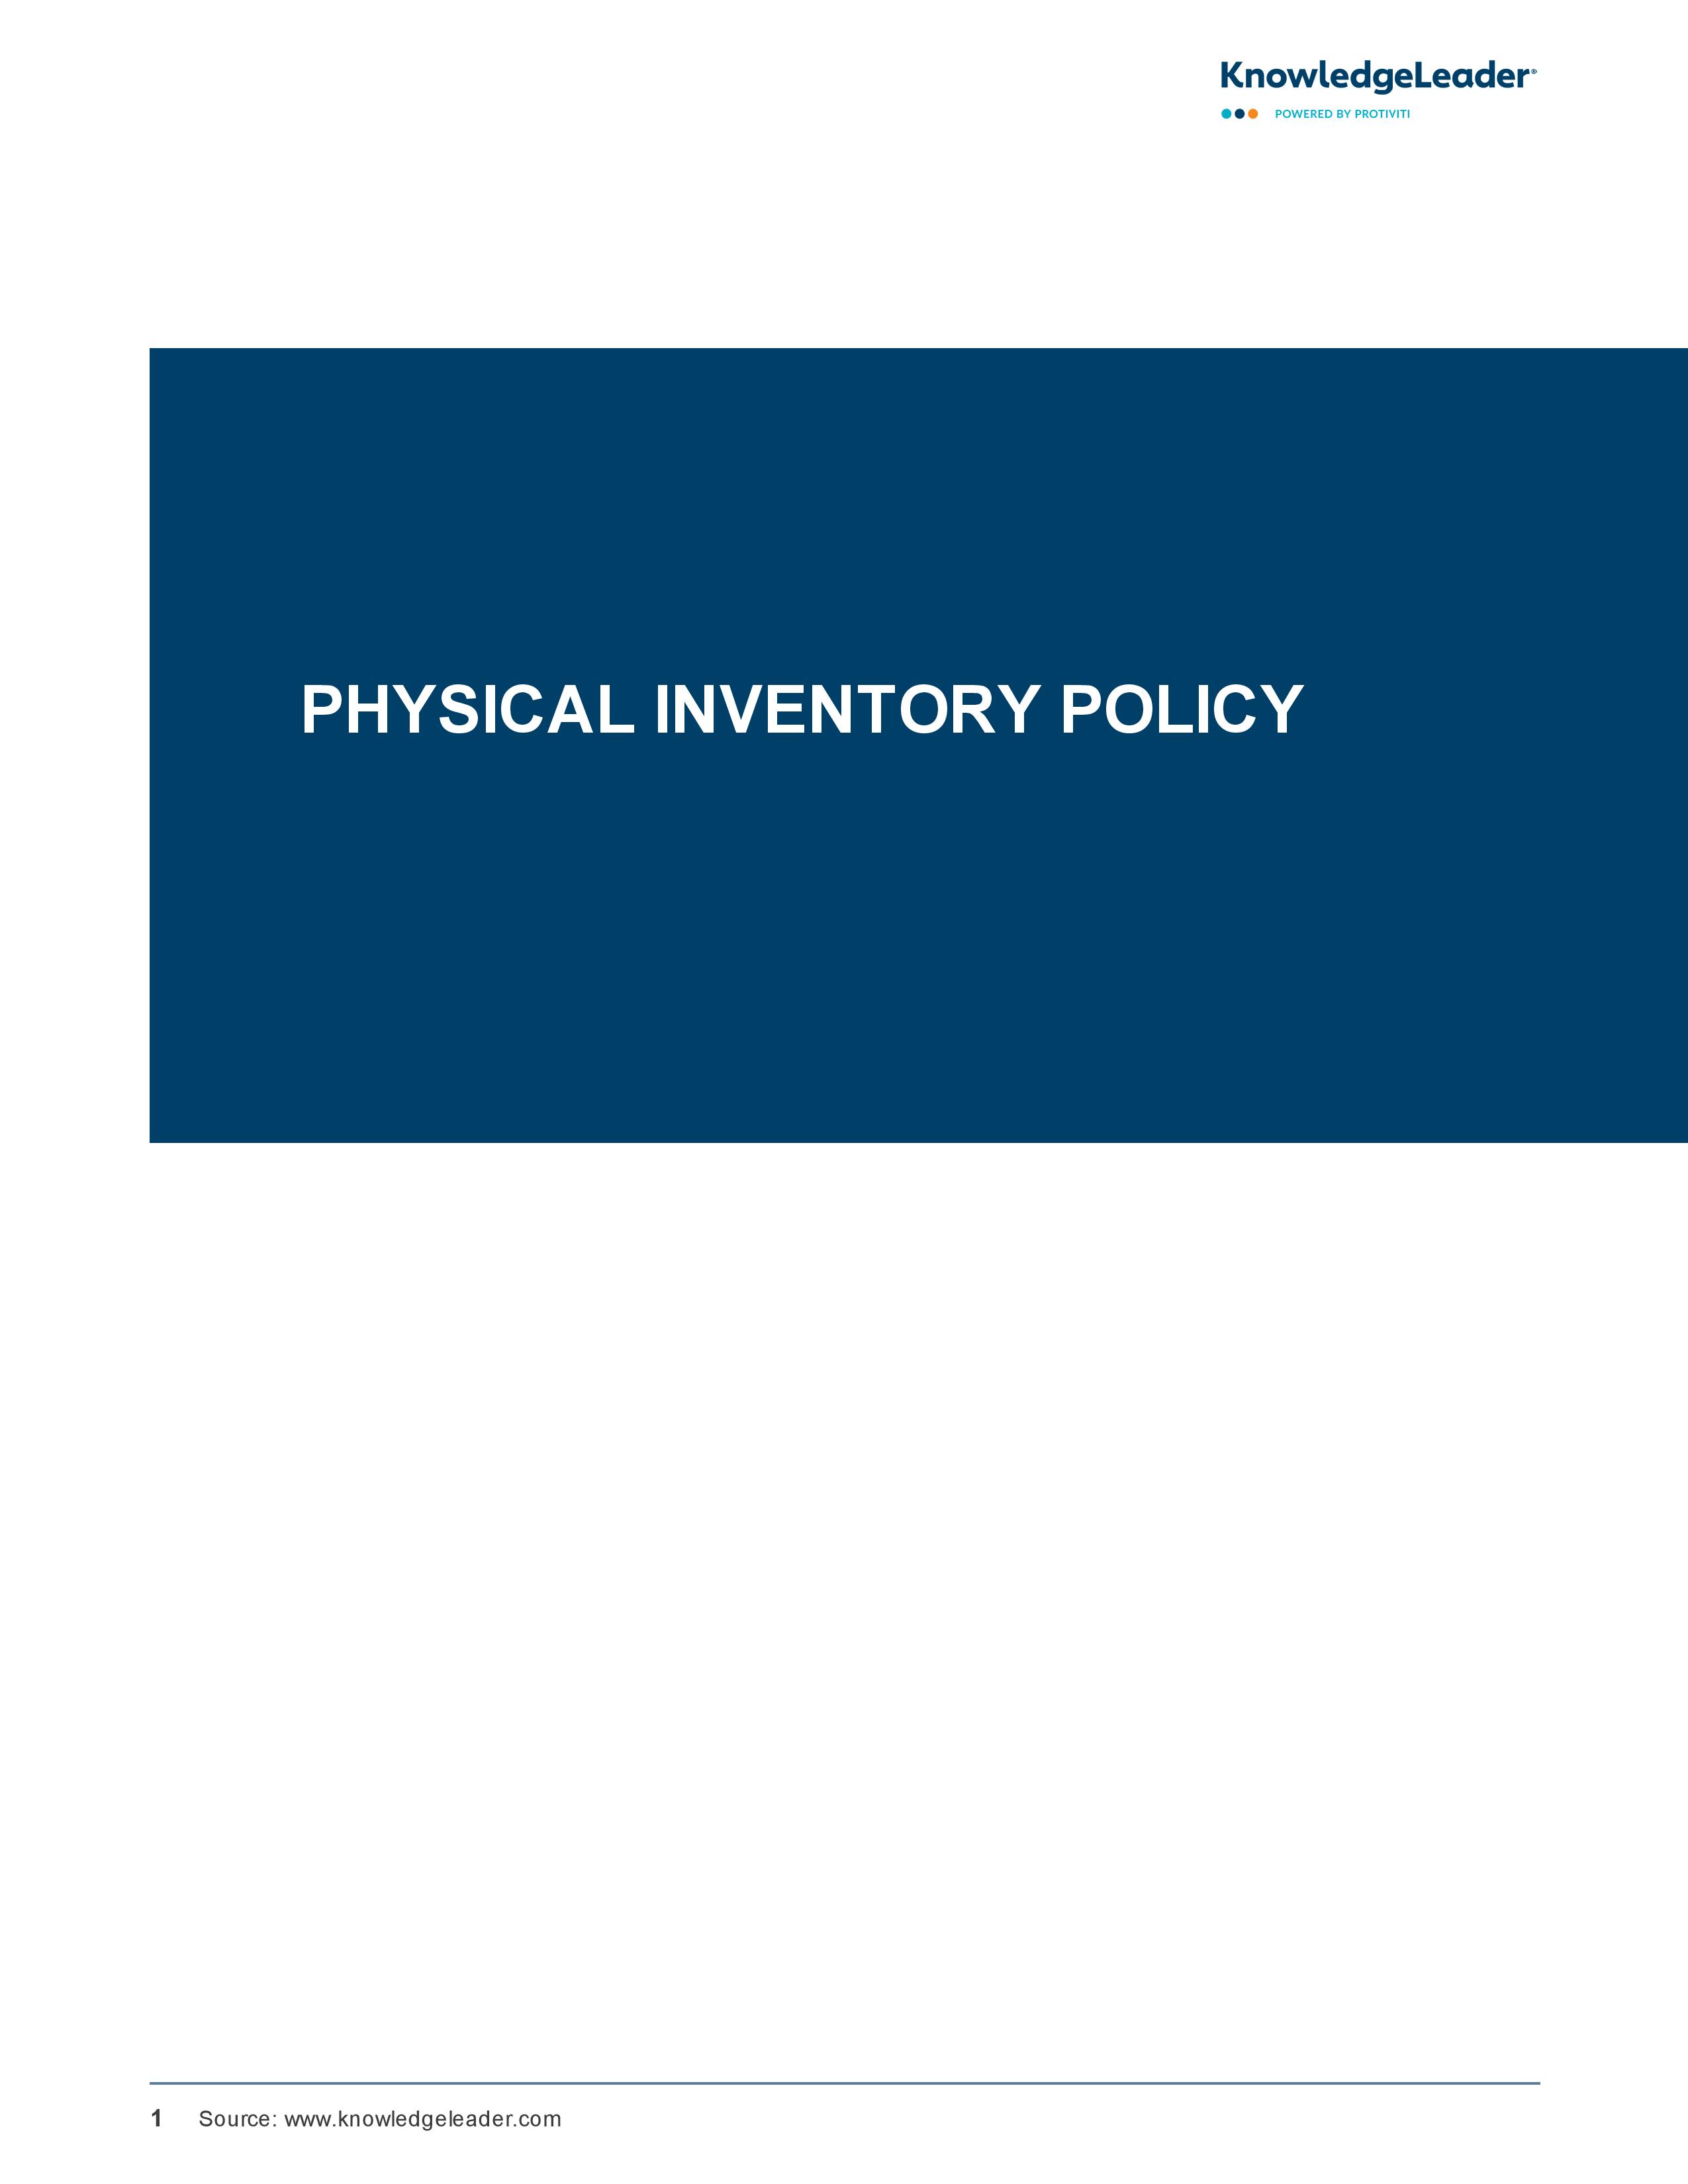 screenshot of the first page of Physical Inventory Policy